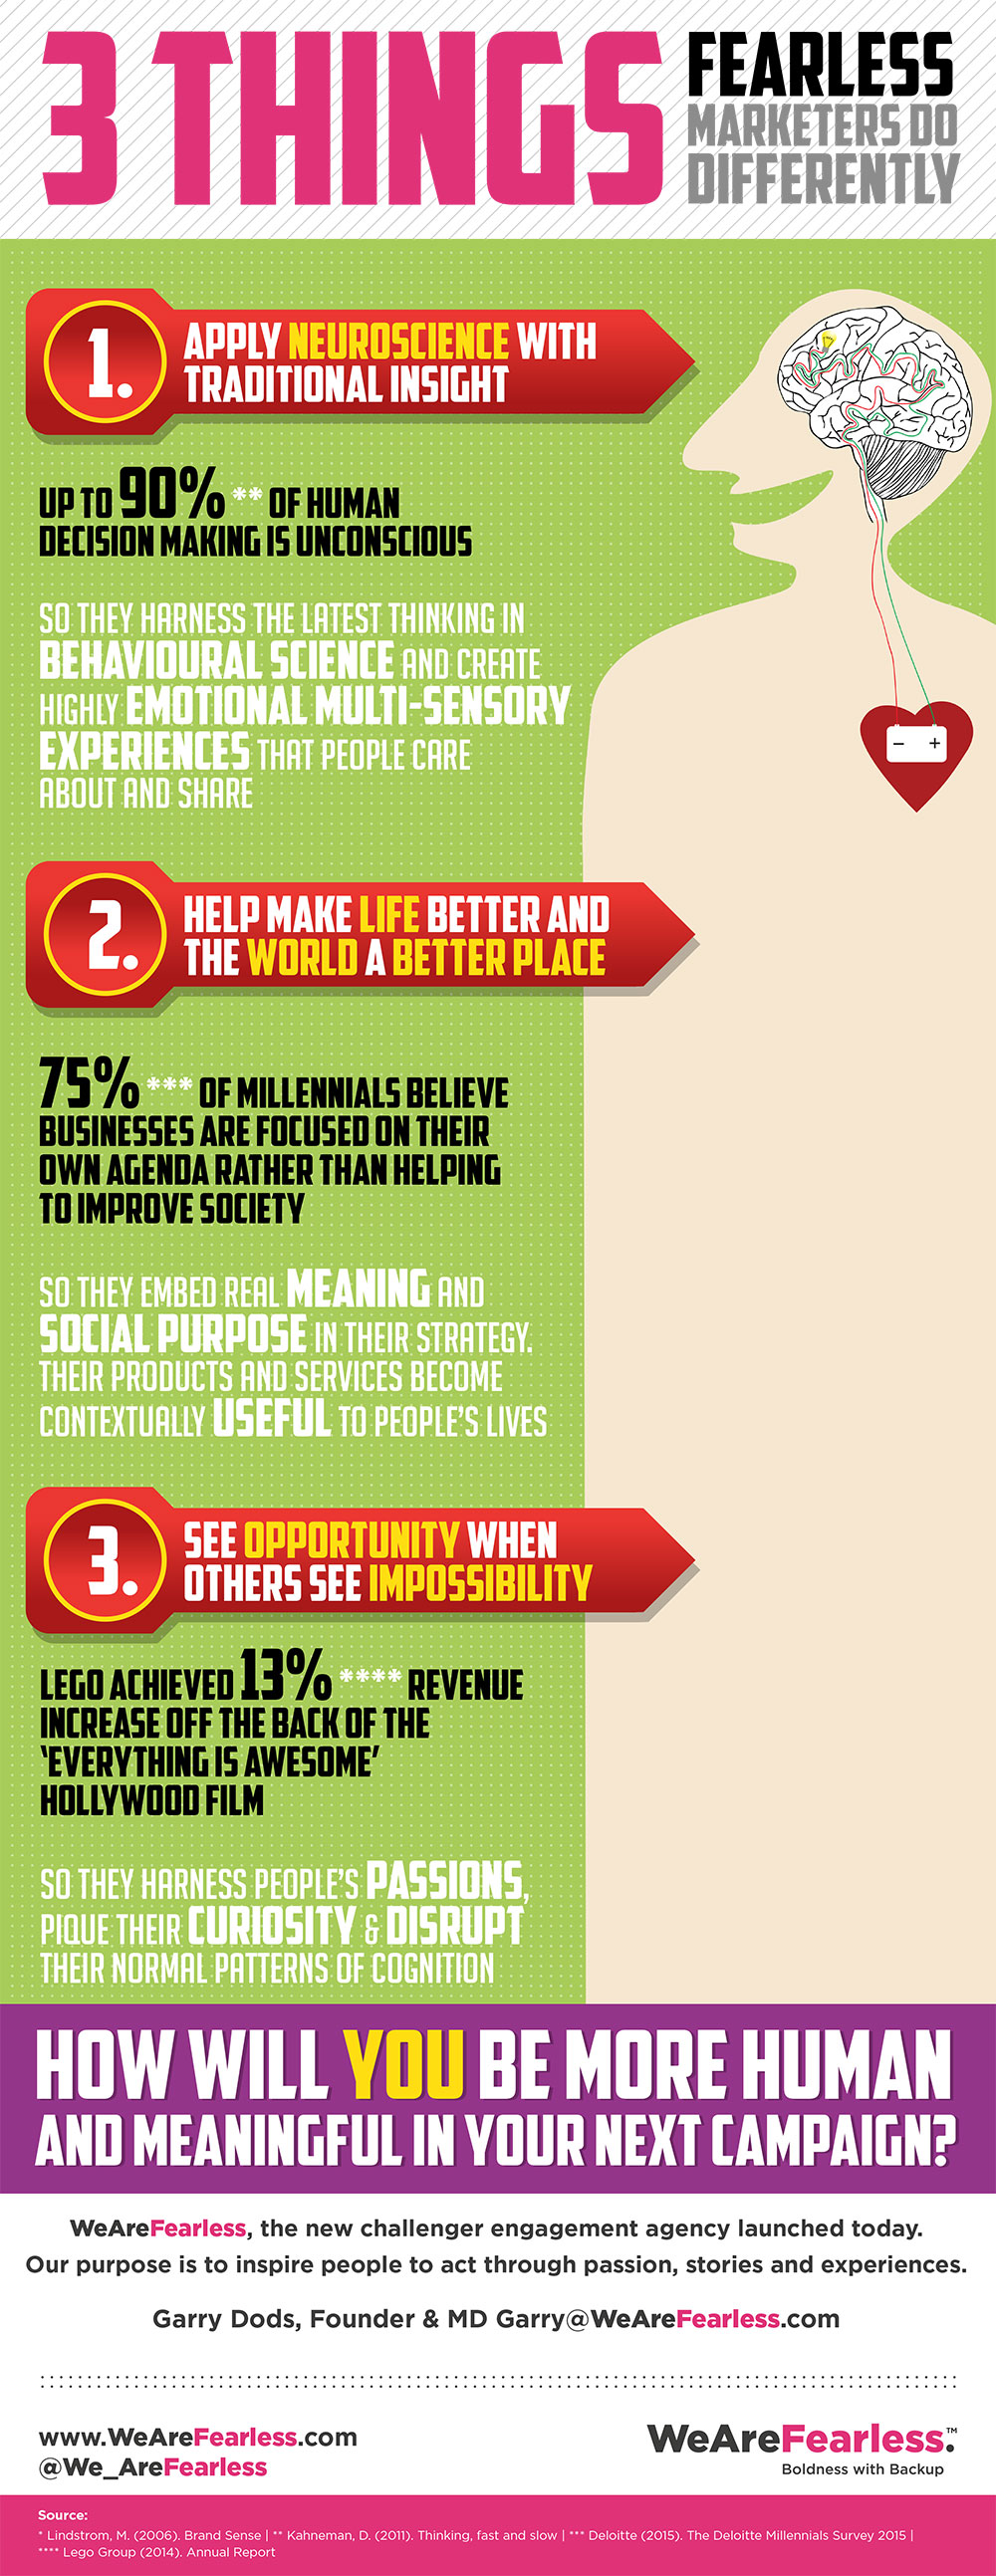 Infographic_3 things Fearless Marketers do differently